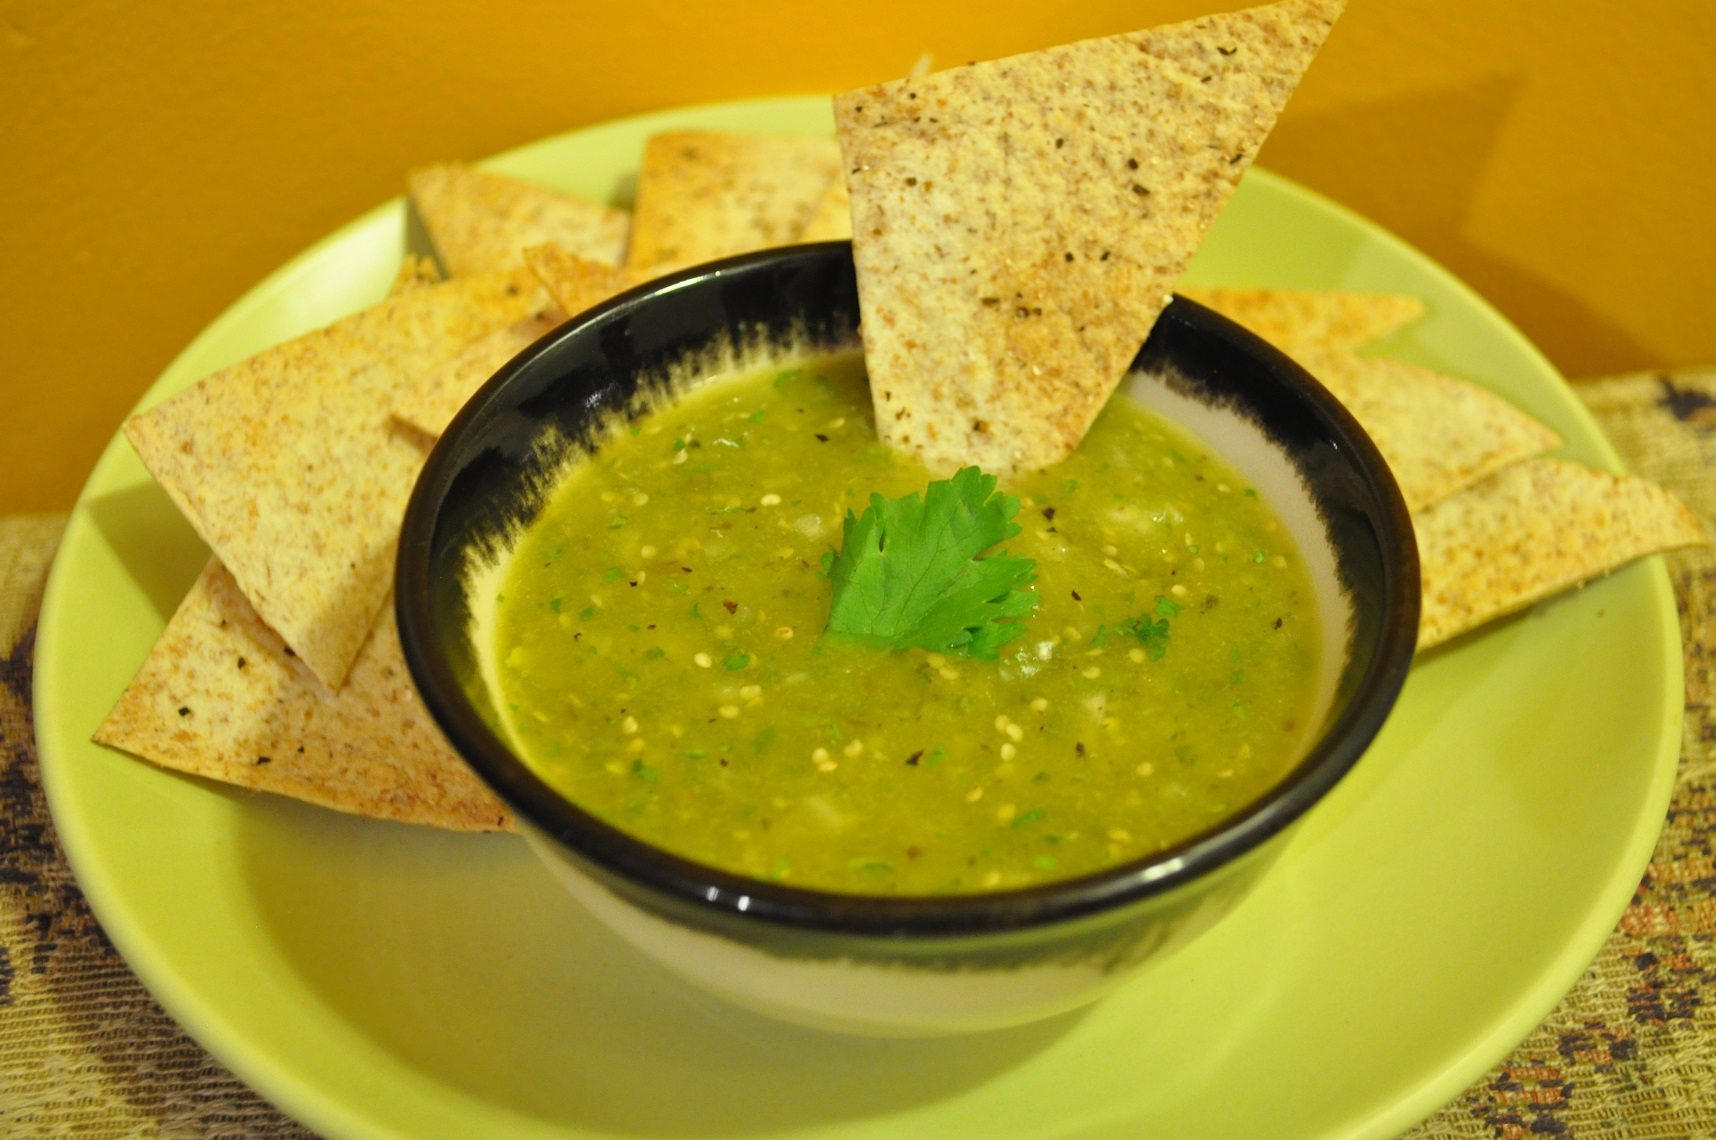 Grilled tomatillo salsa and chips